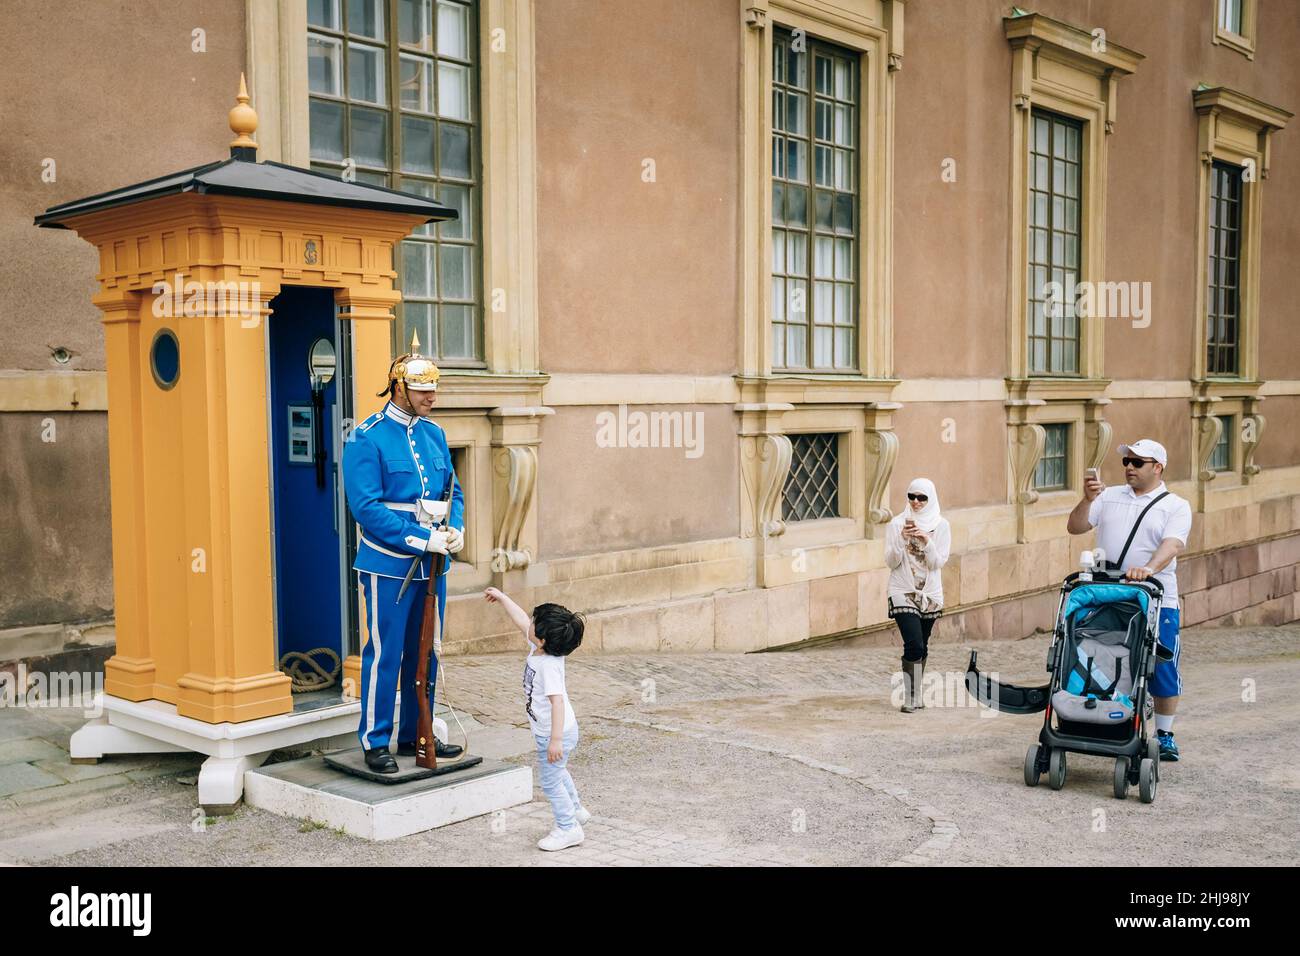 Tourists visit and photograph the guard of honor at the Royal palace in Gamla Stan, where king Carl XVI Gustaf has his working office. Stock Photo